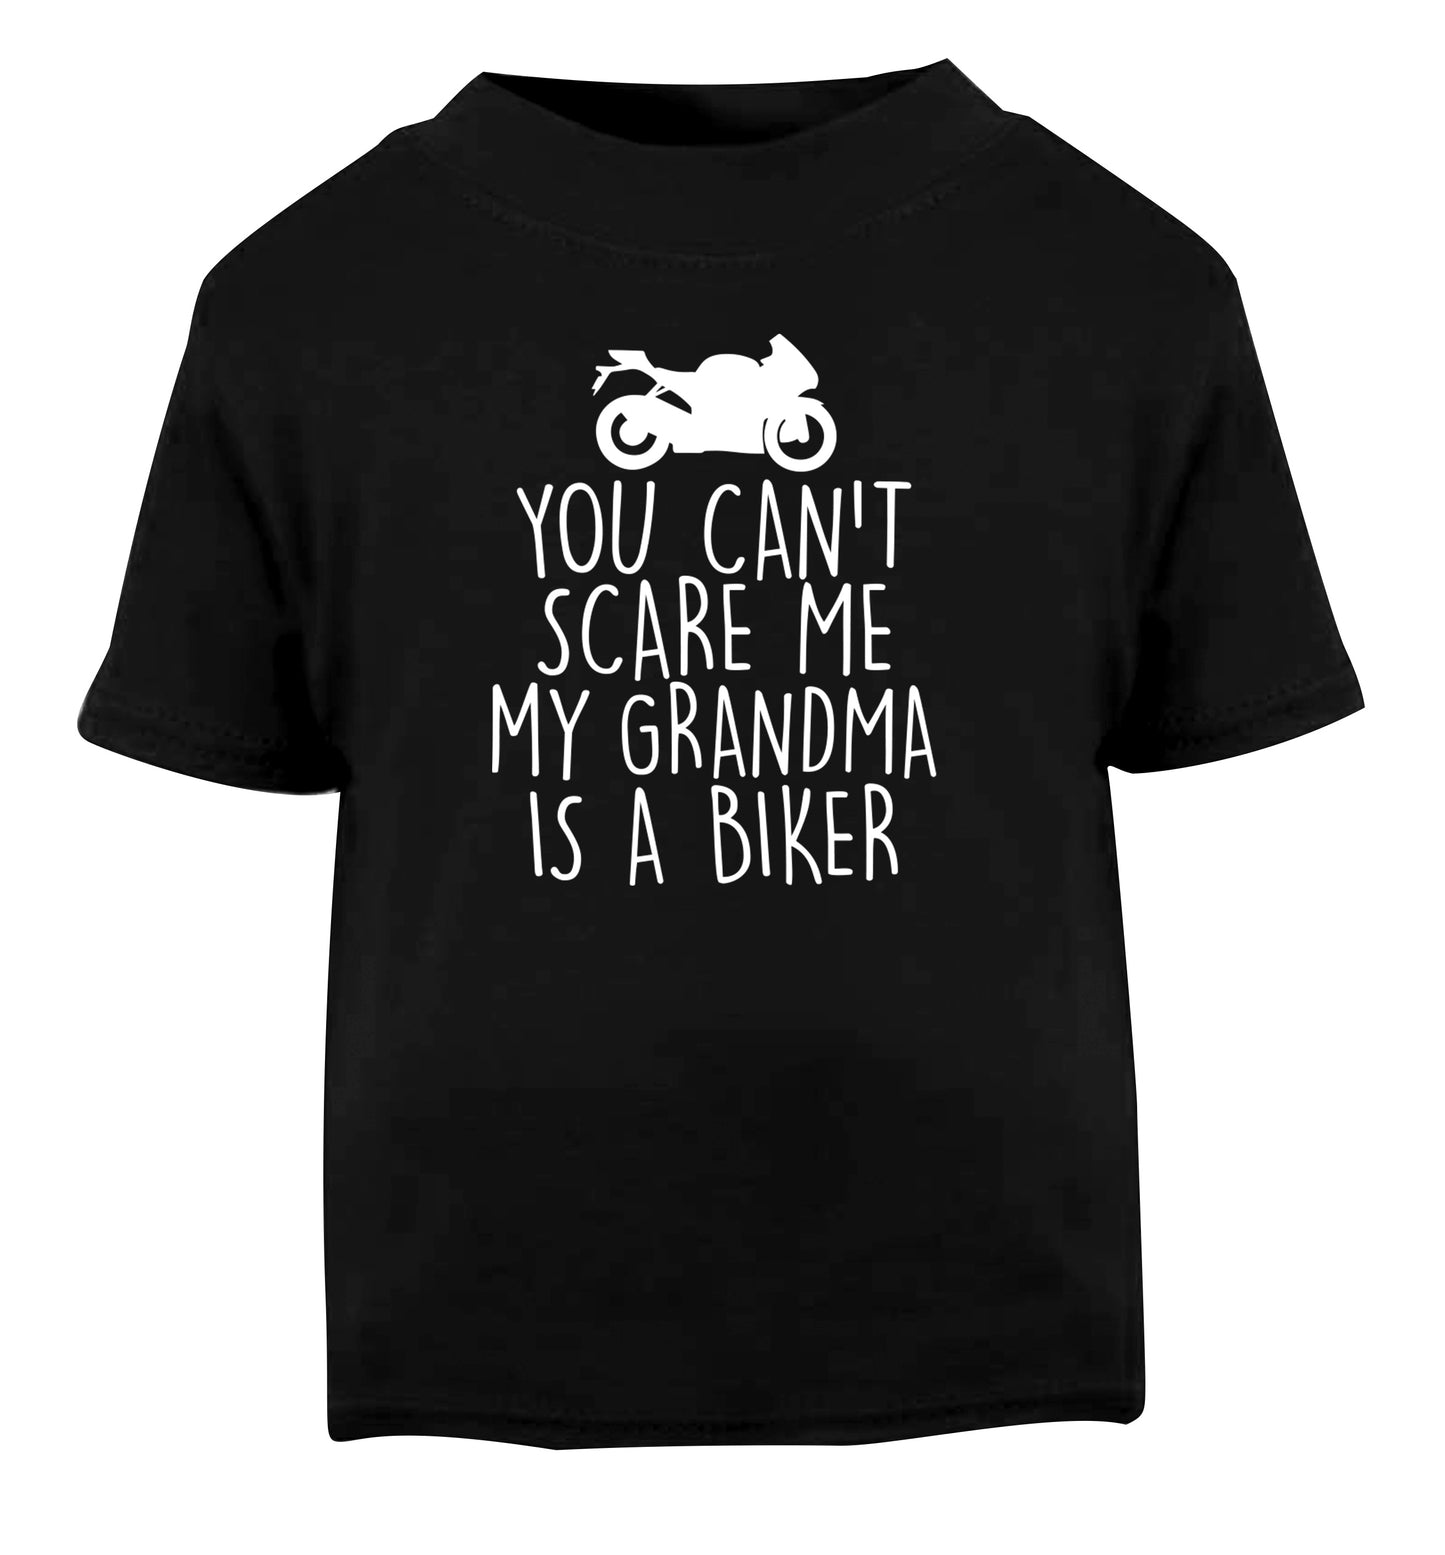 You can't scare me my grandma is a biker Black Baby Toddler Tshirt 2 years